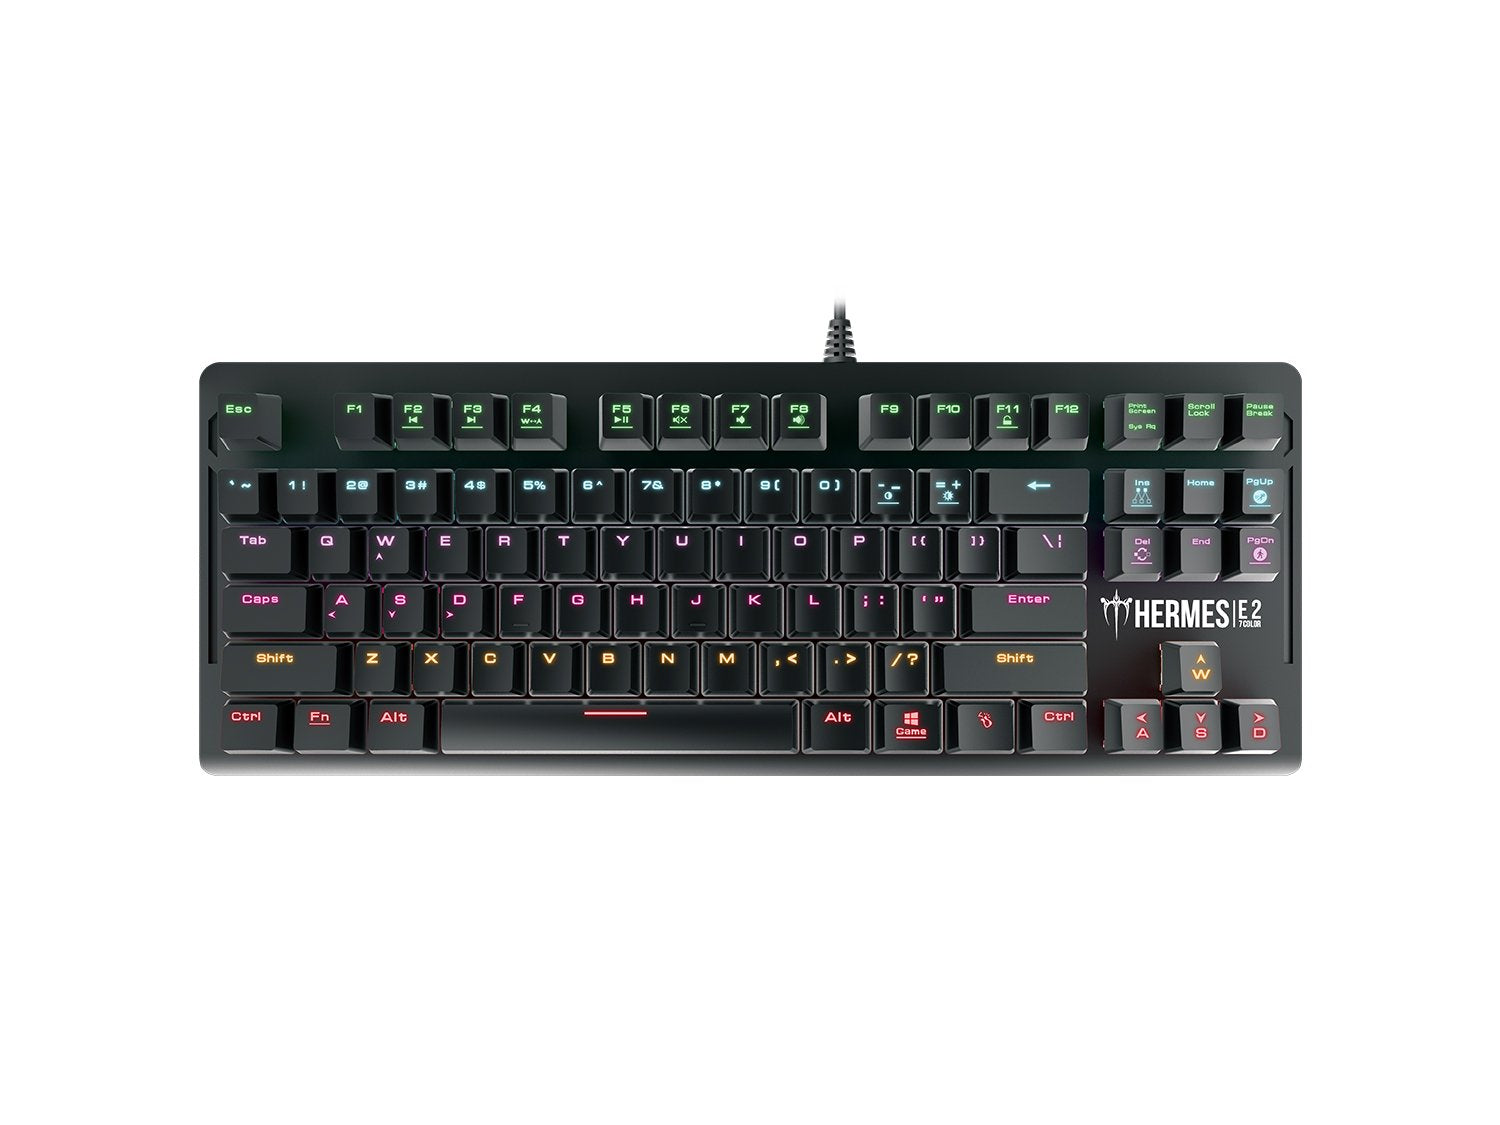 Gamdias HERMES E2 7 COLOR Mechanical Keyboard 50M Lifecycle Blue/Brown/Red/Black Switches 370x140x30mm 675g 16KB Memory 1000Hz Polling N-Key Rollover 6 Multimedia Keys 7 Color Backlit Wired